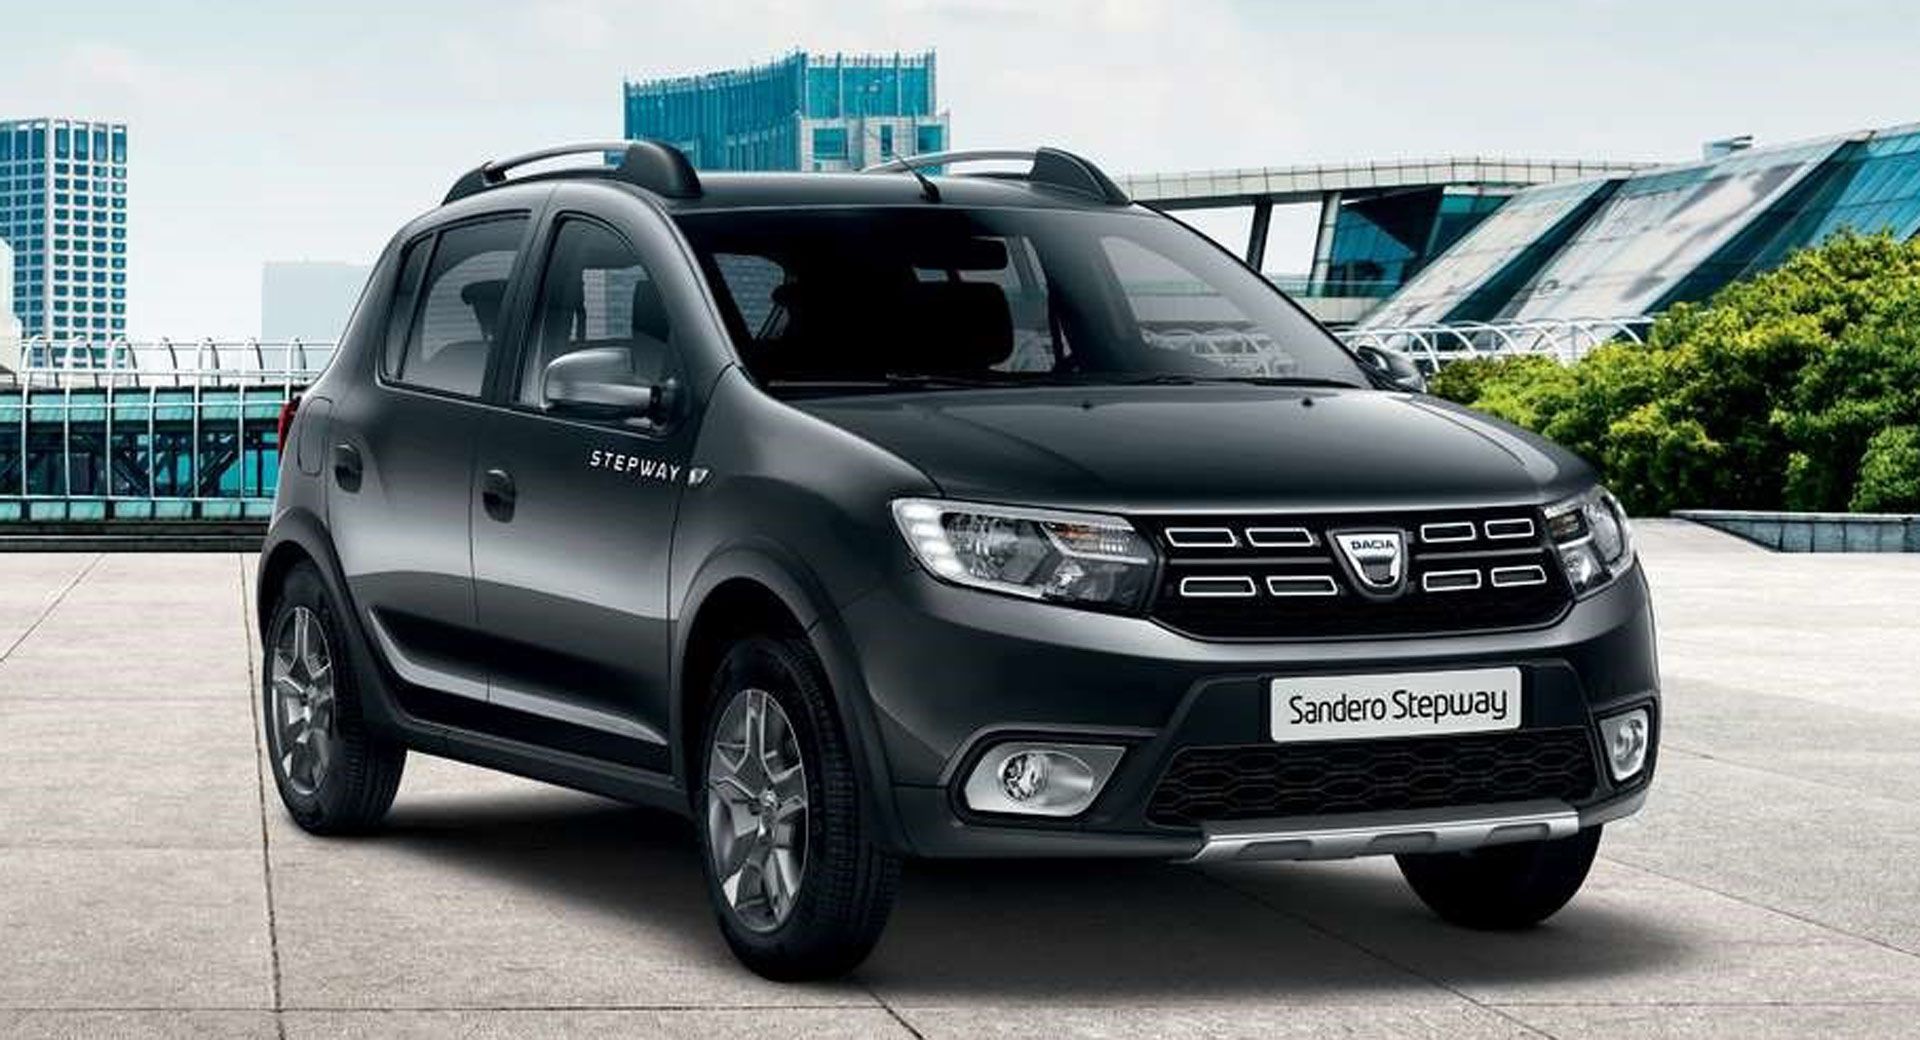 Dacia Sandero Stepway Just Got More Affordable With New Urban Edition